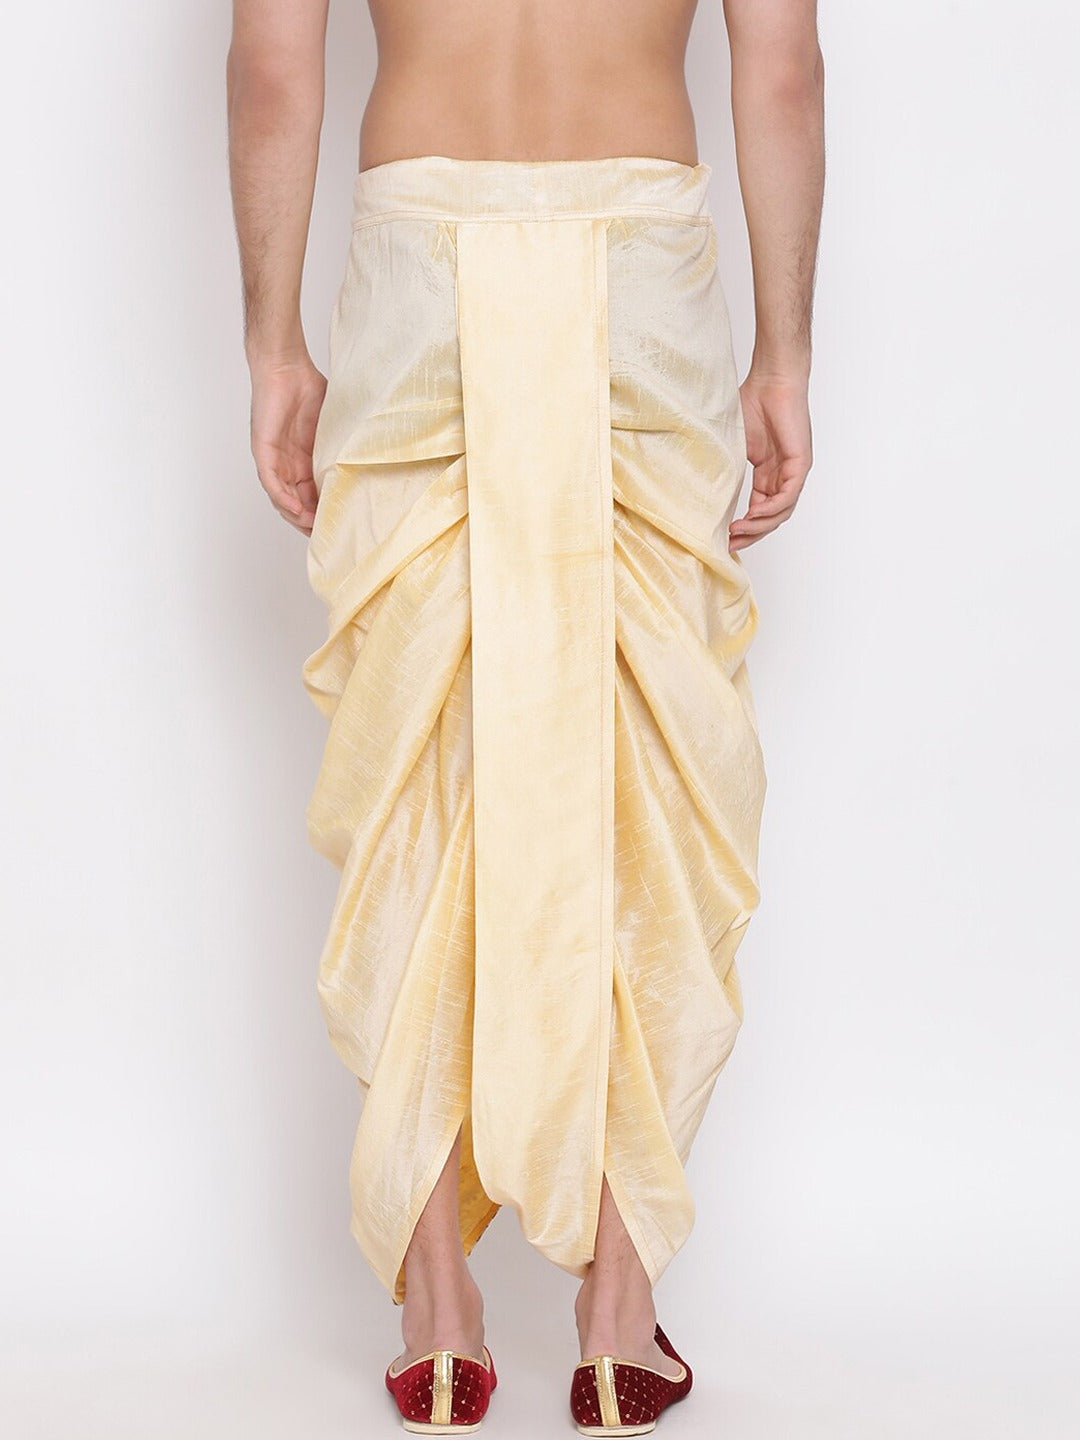 Gold Embroidered Silk Dhoti Indian Clothing in Denver, CO, Aurora, CO, Boulder, CO, Fort Collins, CO, Colorado Springs, CO, Parker, CO, Highlands Ranch, CO, Cherry Creek, CO, Centennial, CO, and Longmont, CO. NATIONWIDE SHIPPING USA- India Fashion X